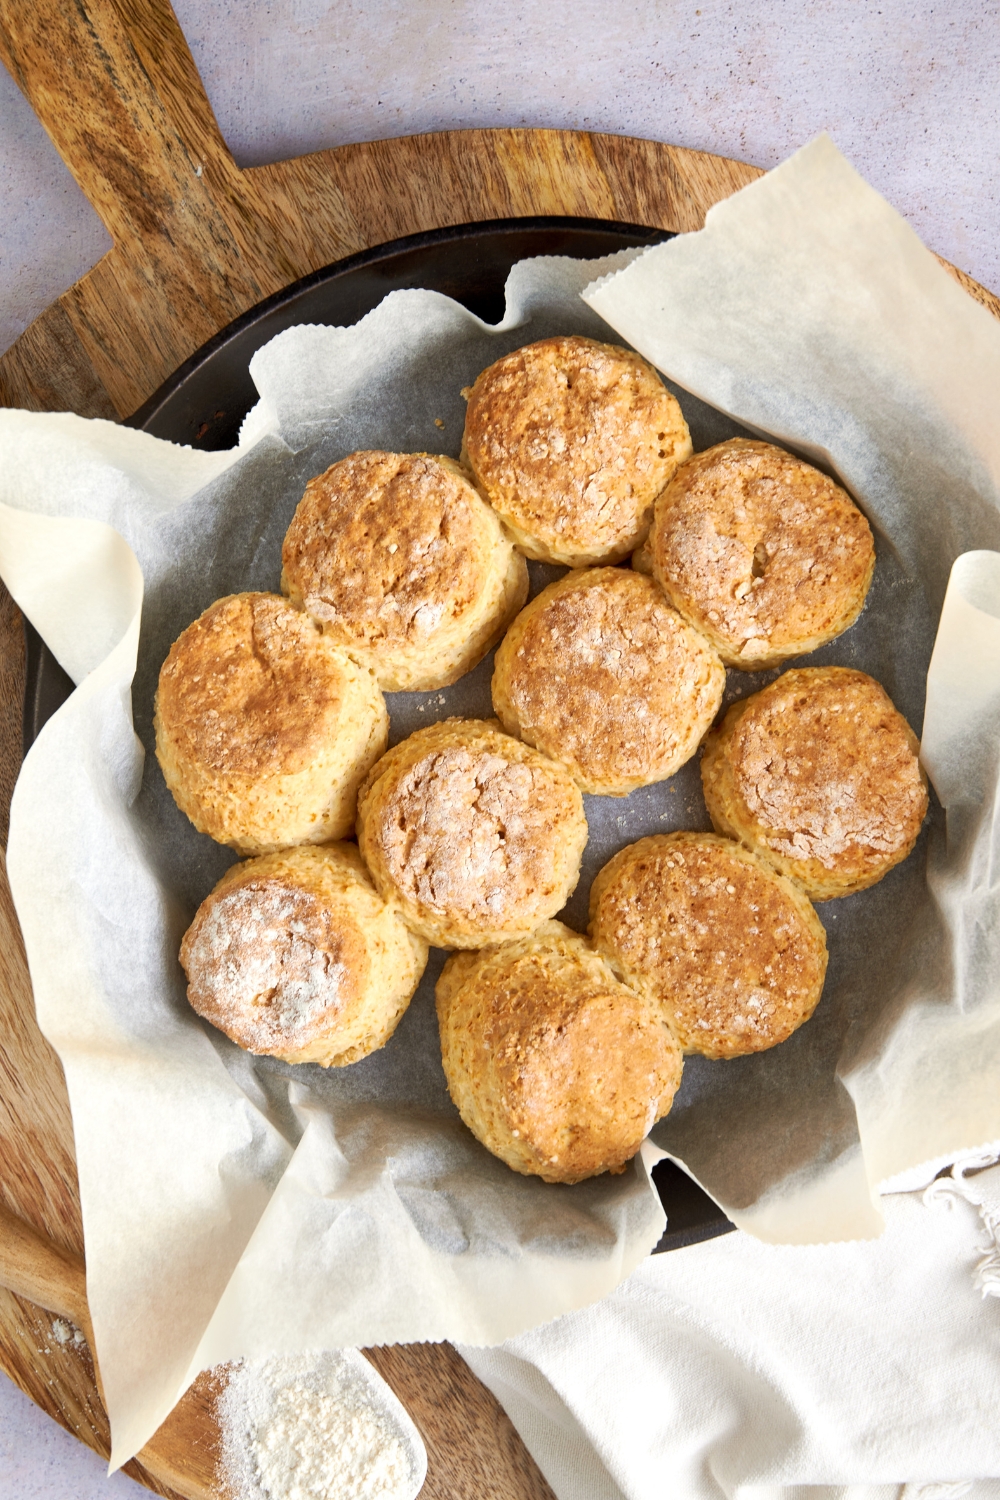 Ten golden brown cathead biscuits in a parchment paper lined pan on a wooden serving board.